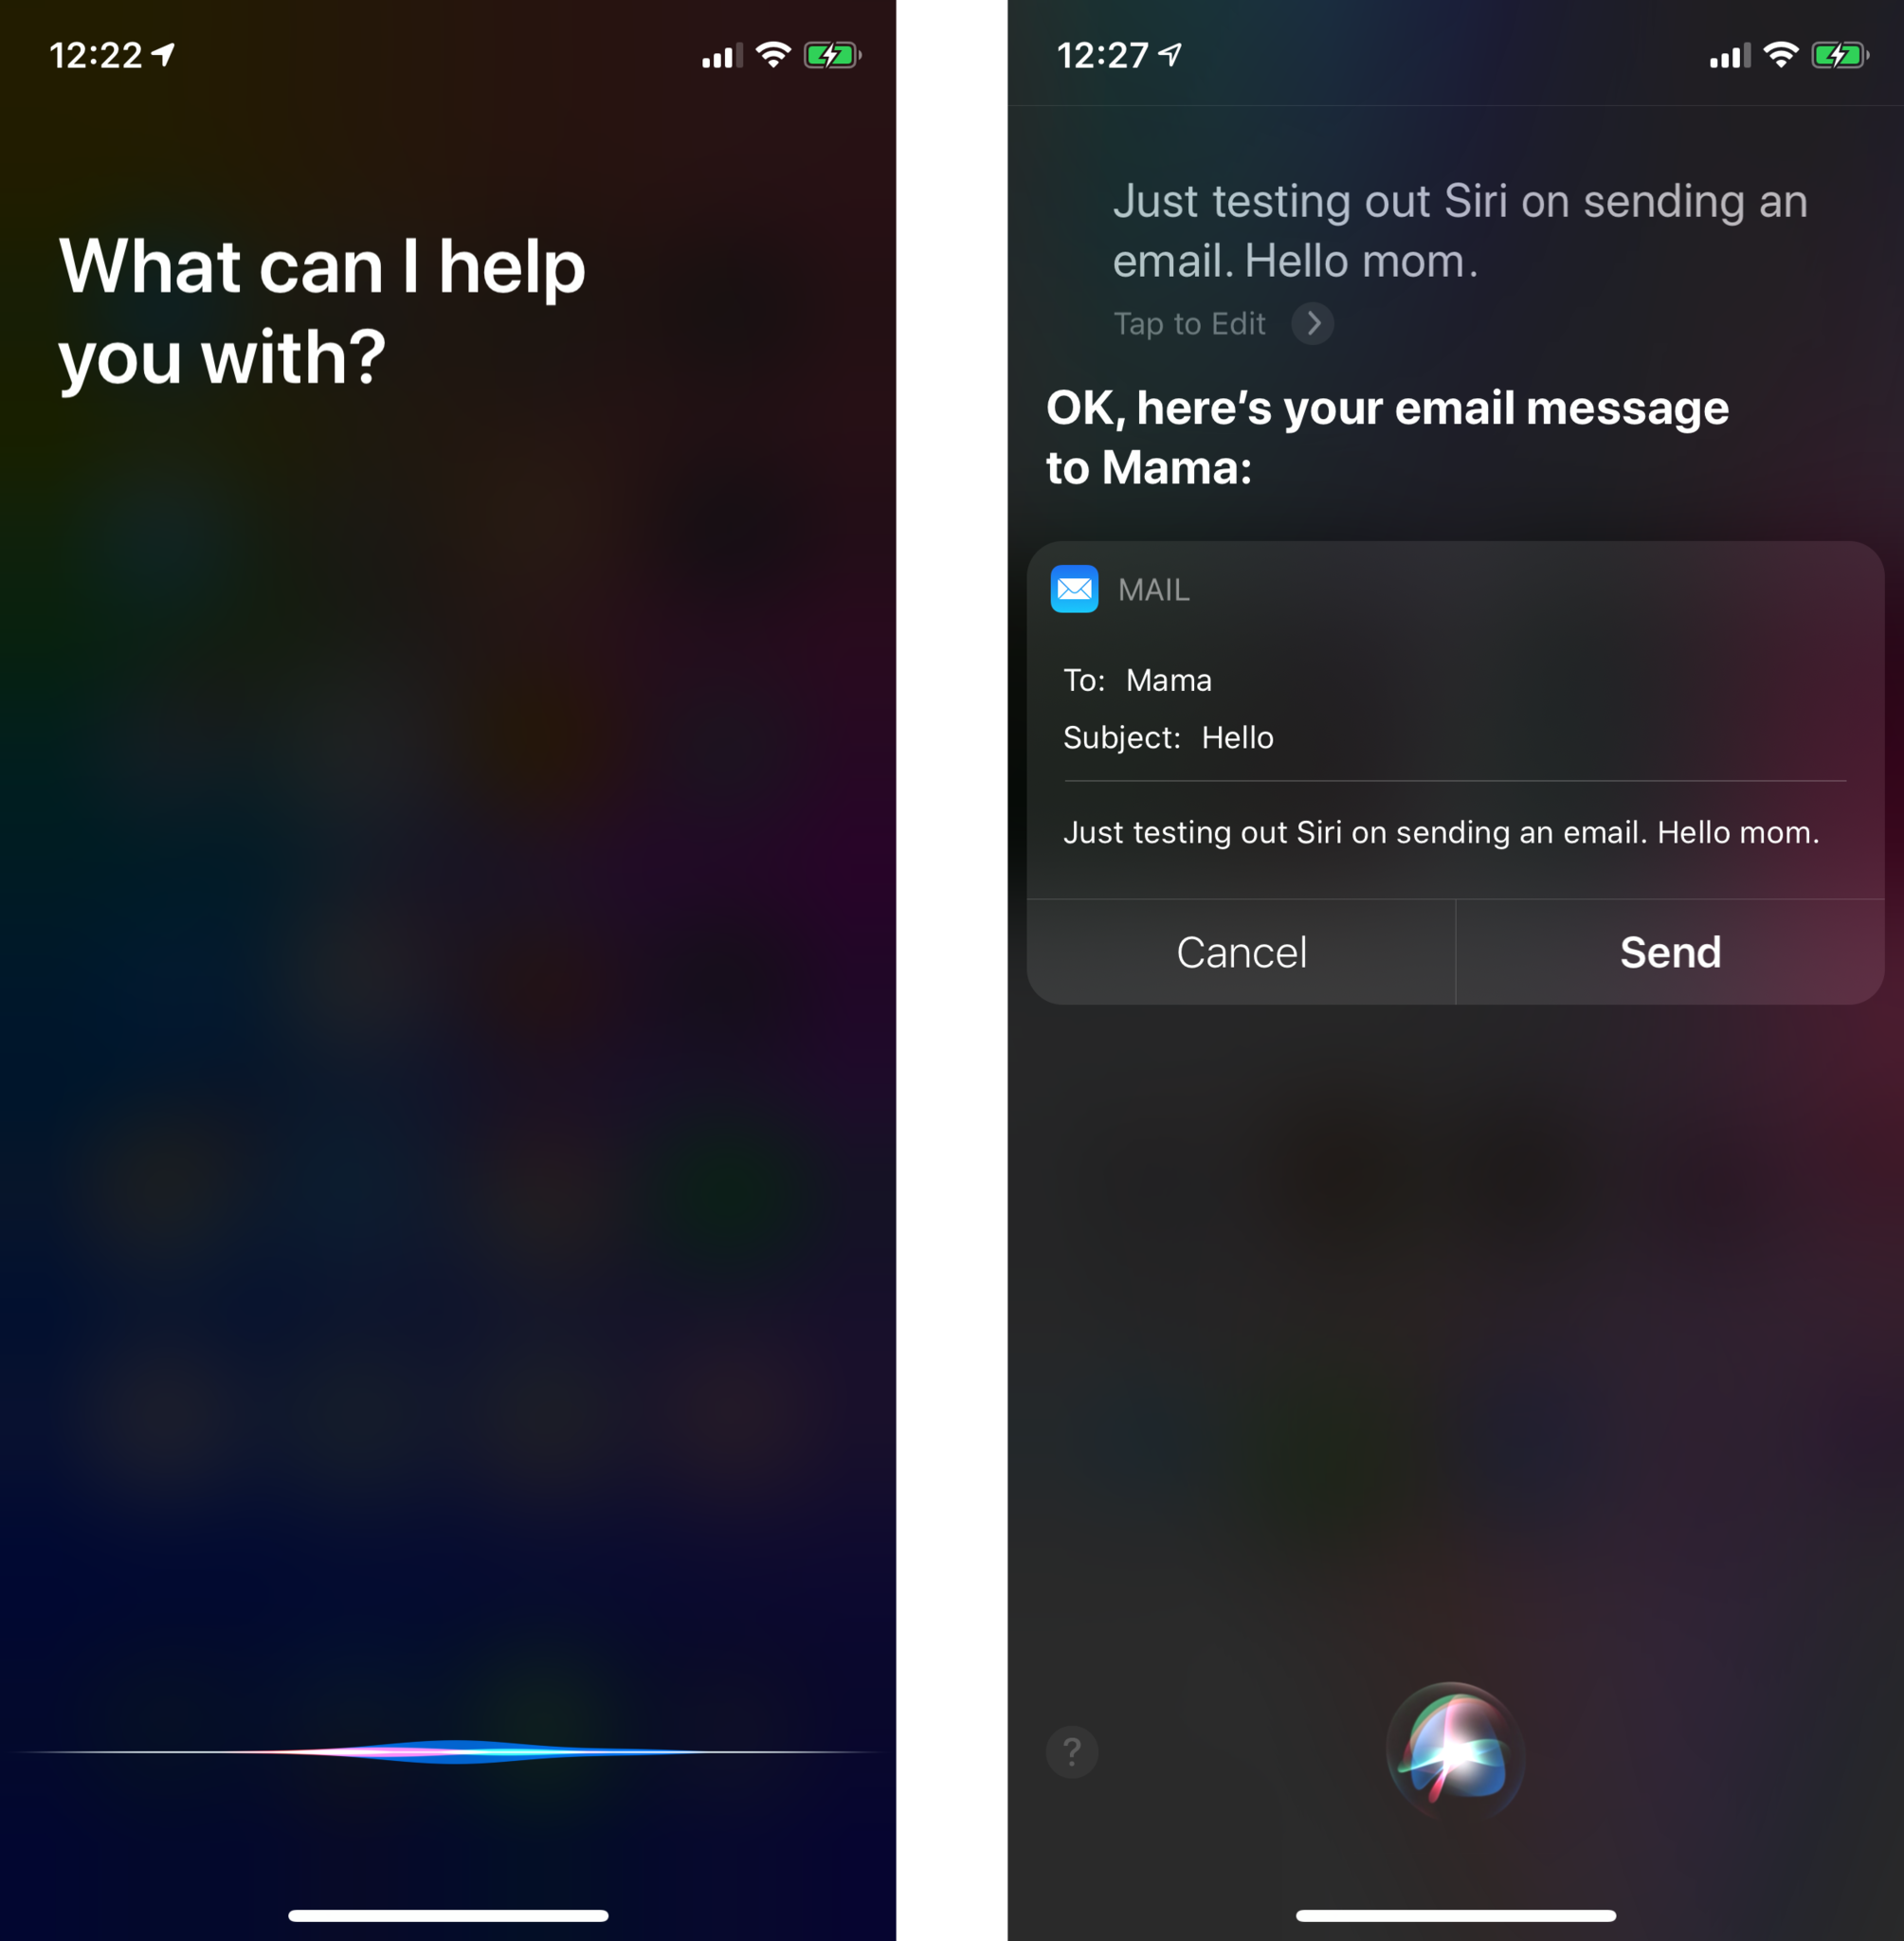 Tell Siri who you want to email and say the subject and body of email